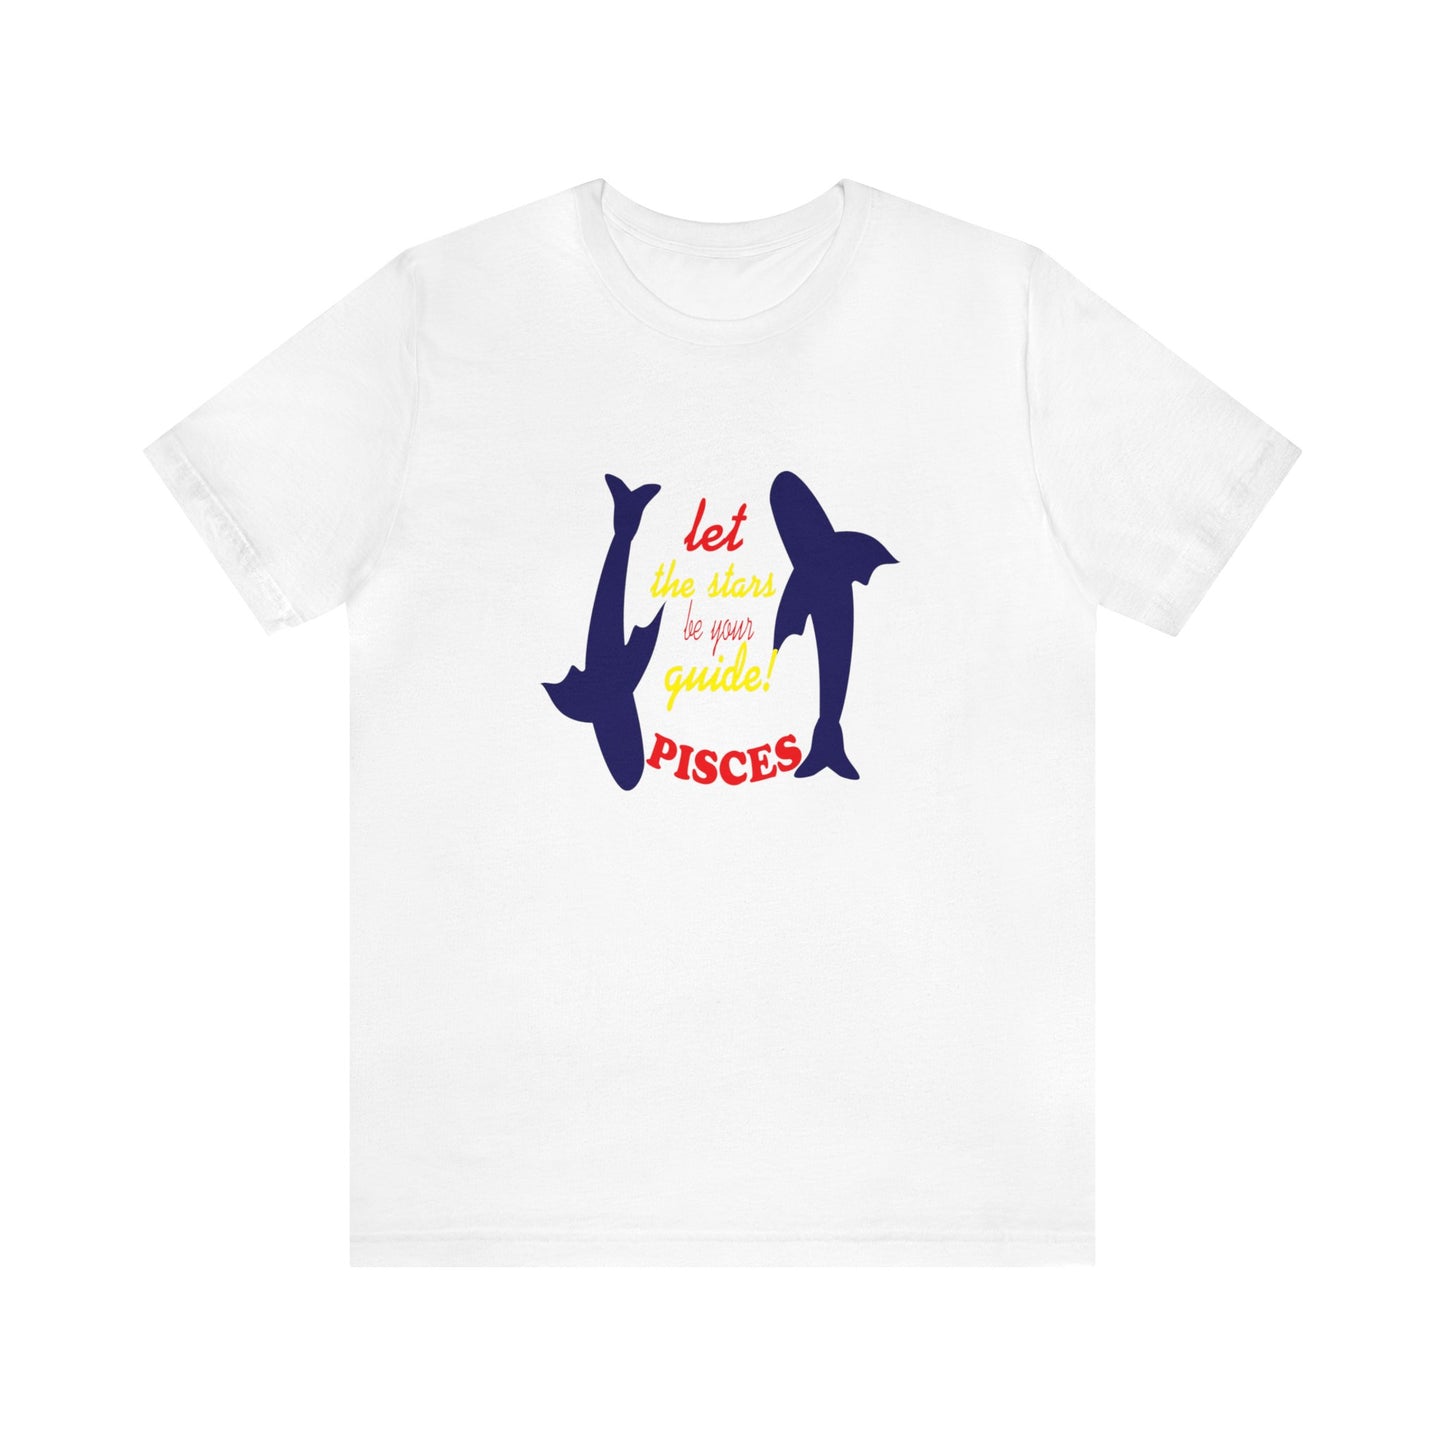 PISCES T-Shirt Two whales